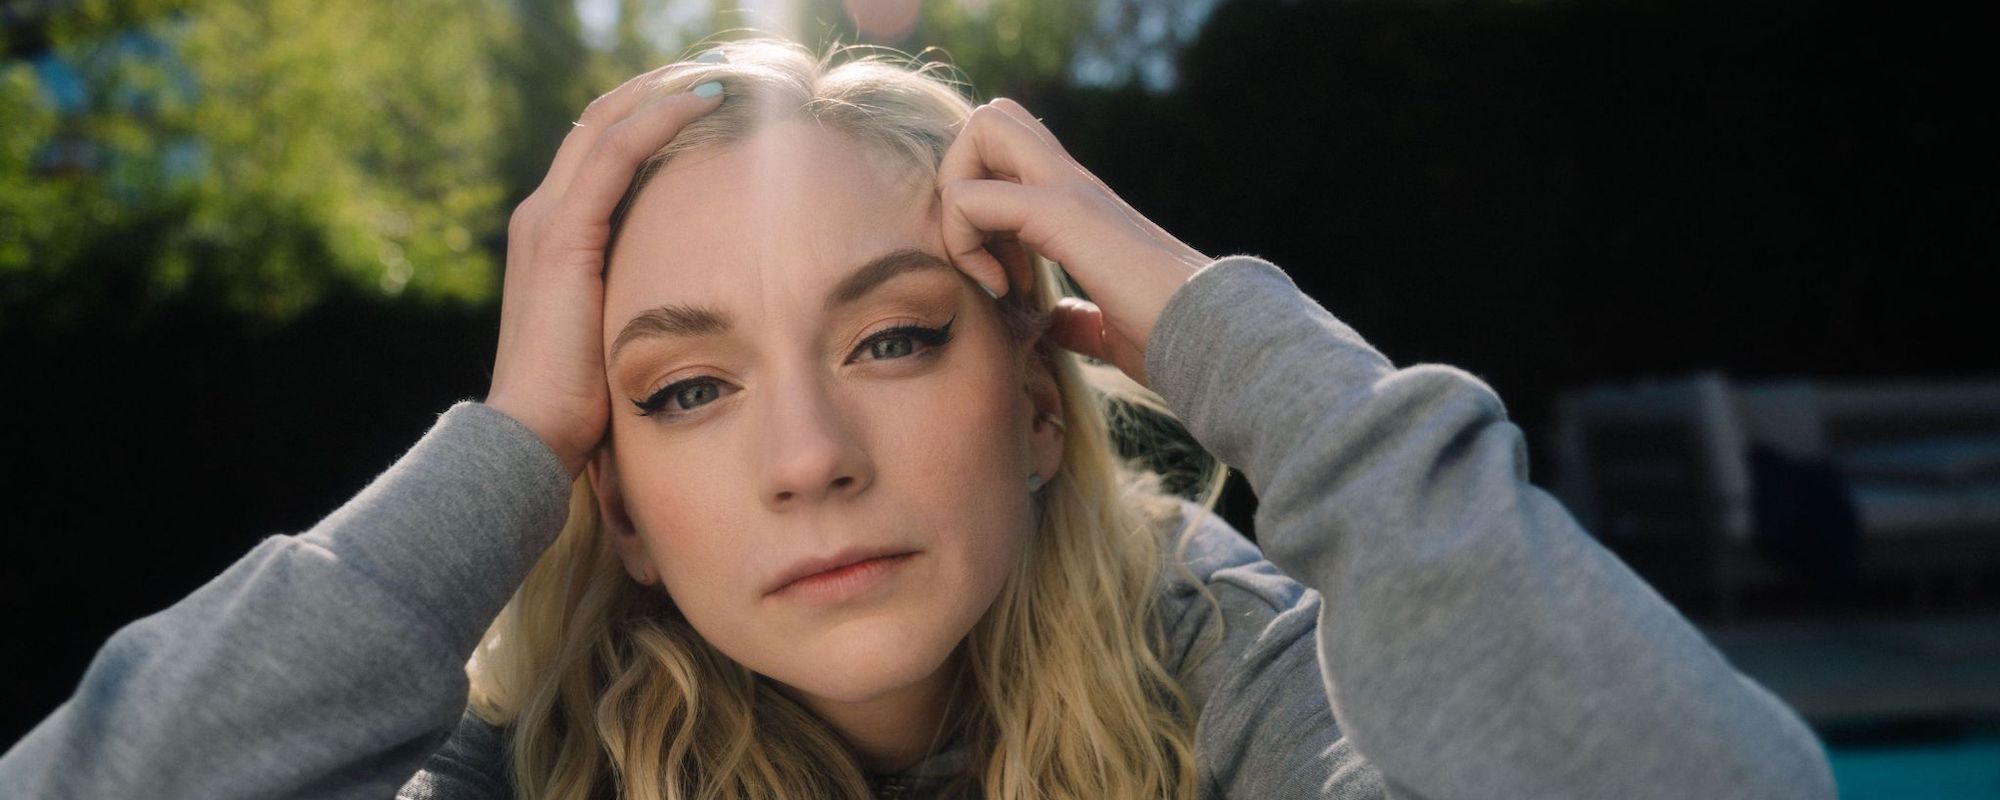 Emily Kinney Delivers More Than a “Breakup Album” with ‘Swimteam’